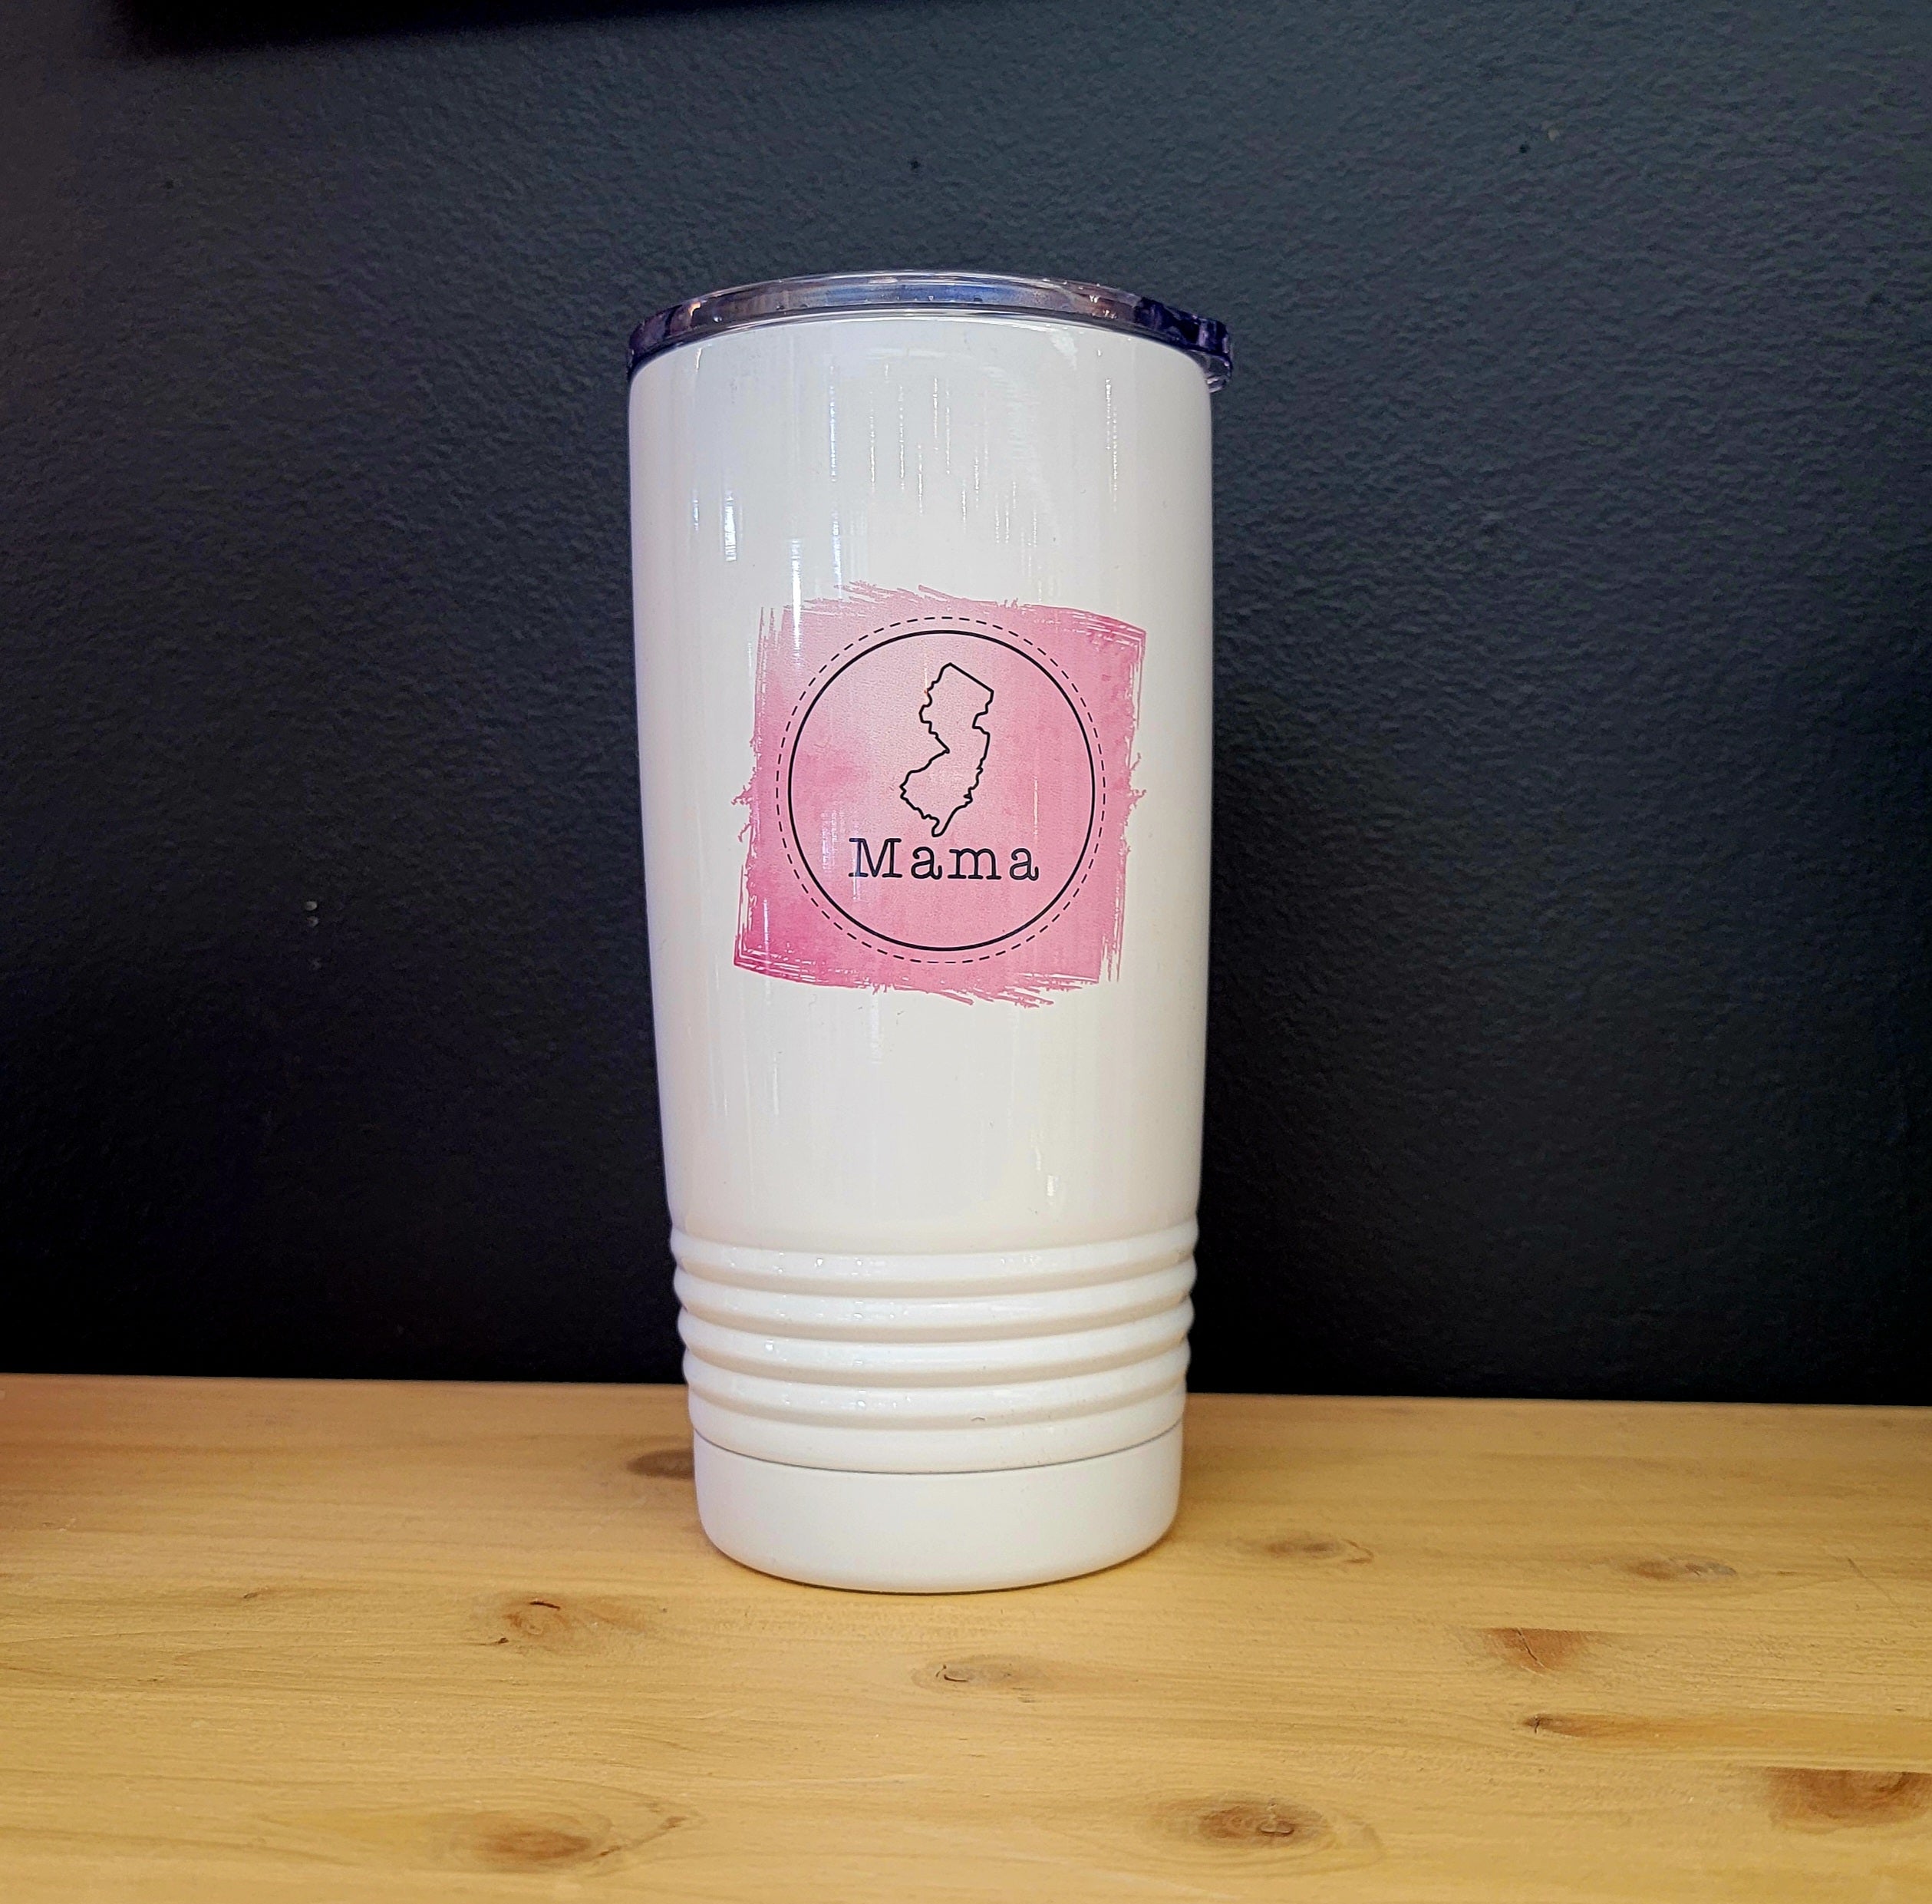 20 oz insulated cup for hot or cold beverages with NJ theme.